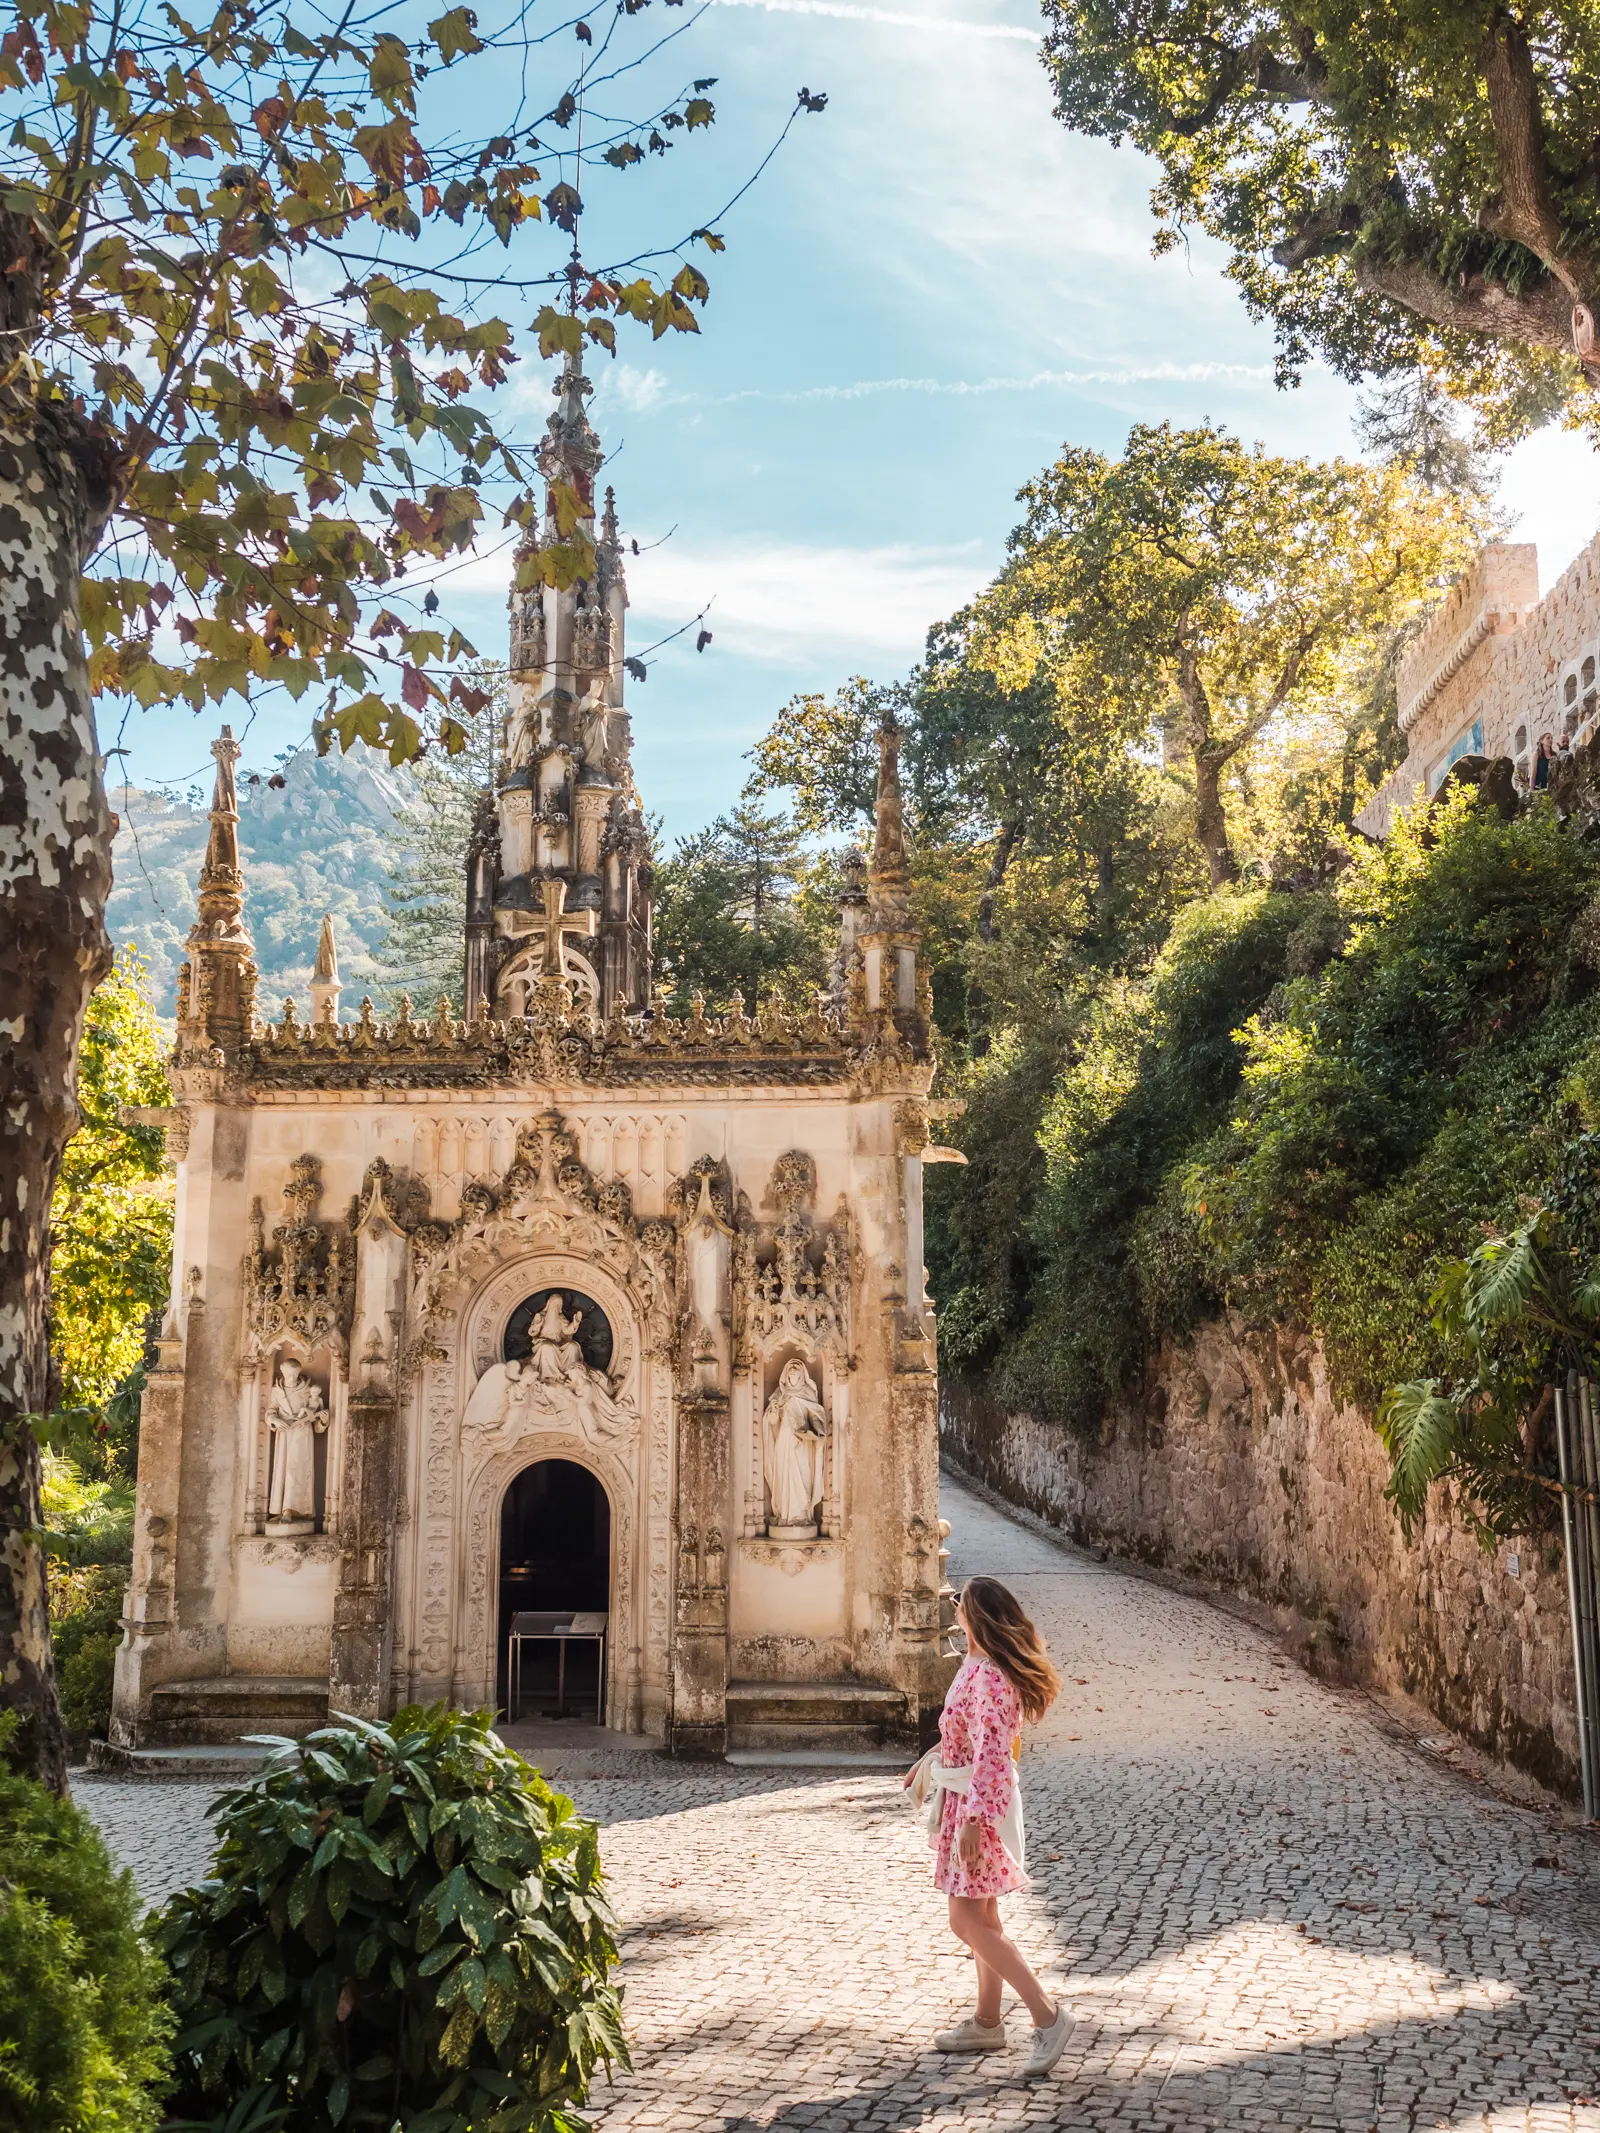 Girl with long dark blonde hair, wearing a pink dress and white shoes, walking towards the ornate chapel on the grounds of Quinta da Regaleira in Sintra, surrounded by green gardens and a cobbled walkway.